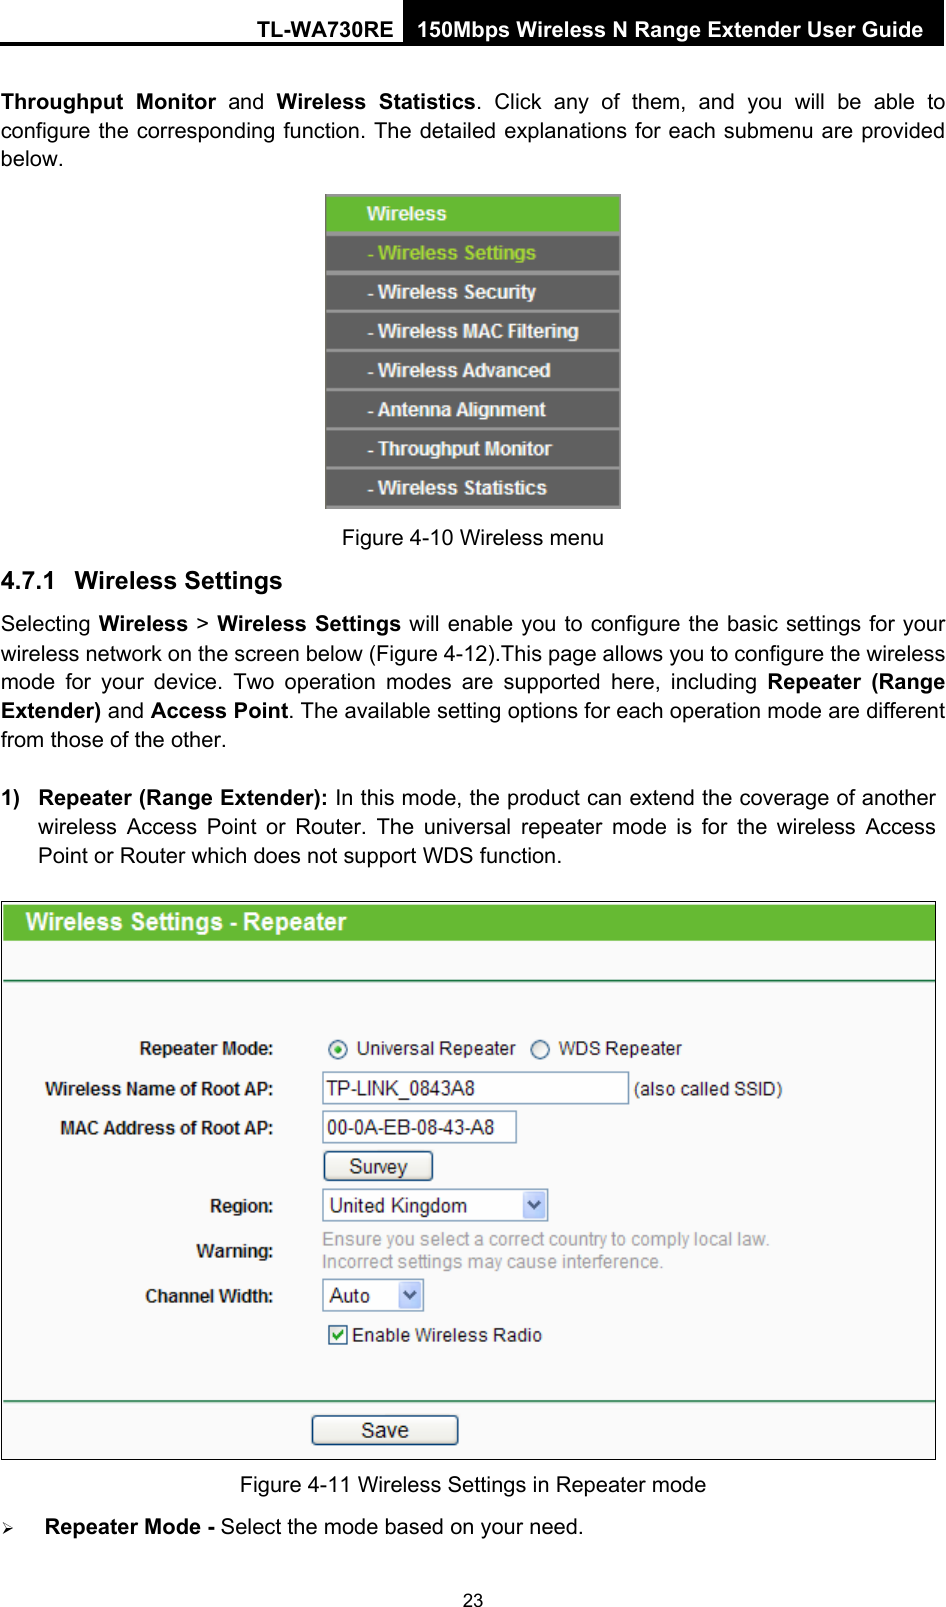 TL-WA730RE 150Mbps Wireless N Range Extender User Guide Throughput Monitor and  Wireless Statistics. Click any of them, and you will be able to configure the corresponding function. The detailed explanations for each submenu are provided below.  Figure 4-10 Wireless menu 4.7.1  Wireless Settings Selecting Wireless &gt; Wireless Settings will enable you to configure the basic settings for your wireless network on the screen below (Figure 4-12).This page allows you to configure the wireless mode for your device. Two operation modes are supported here, including Repeater (Range Extender) and Access Point. The available setting options for each operation mode are different from those of the other. 1)  Repeater (Range Extender): In this mode, the product can extend the coverage of another wireless Access Point or Router. The universal repeater mode is for the wireless Access Point or Router which does not support WDS function.    Figure 4-11 Wireless Settings in Repeater mode ¾ Repeater Mode - Select the mode based on your need. 23 